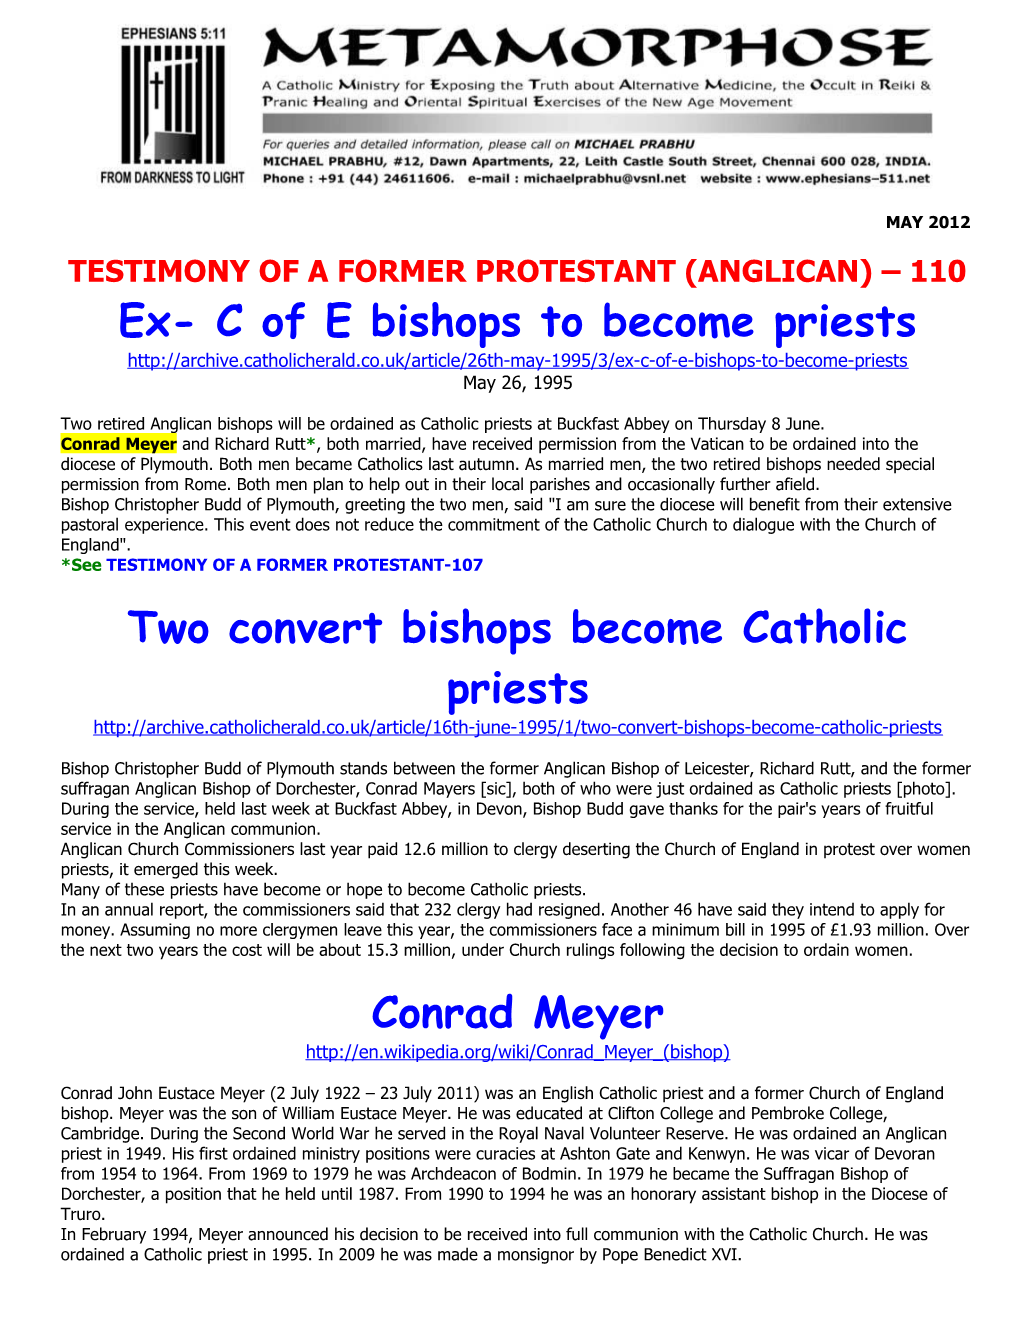 Testimony of a Former Protestant (Anglican) 110